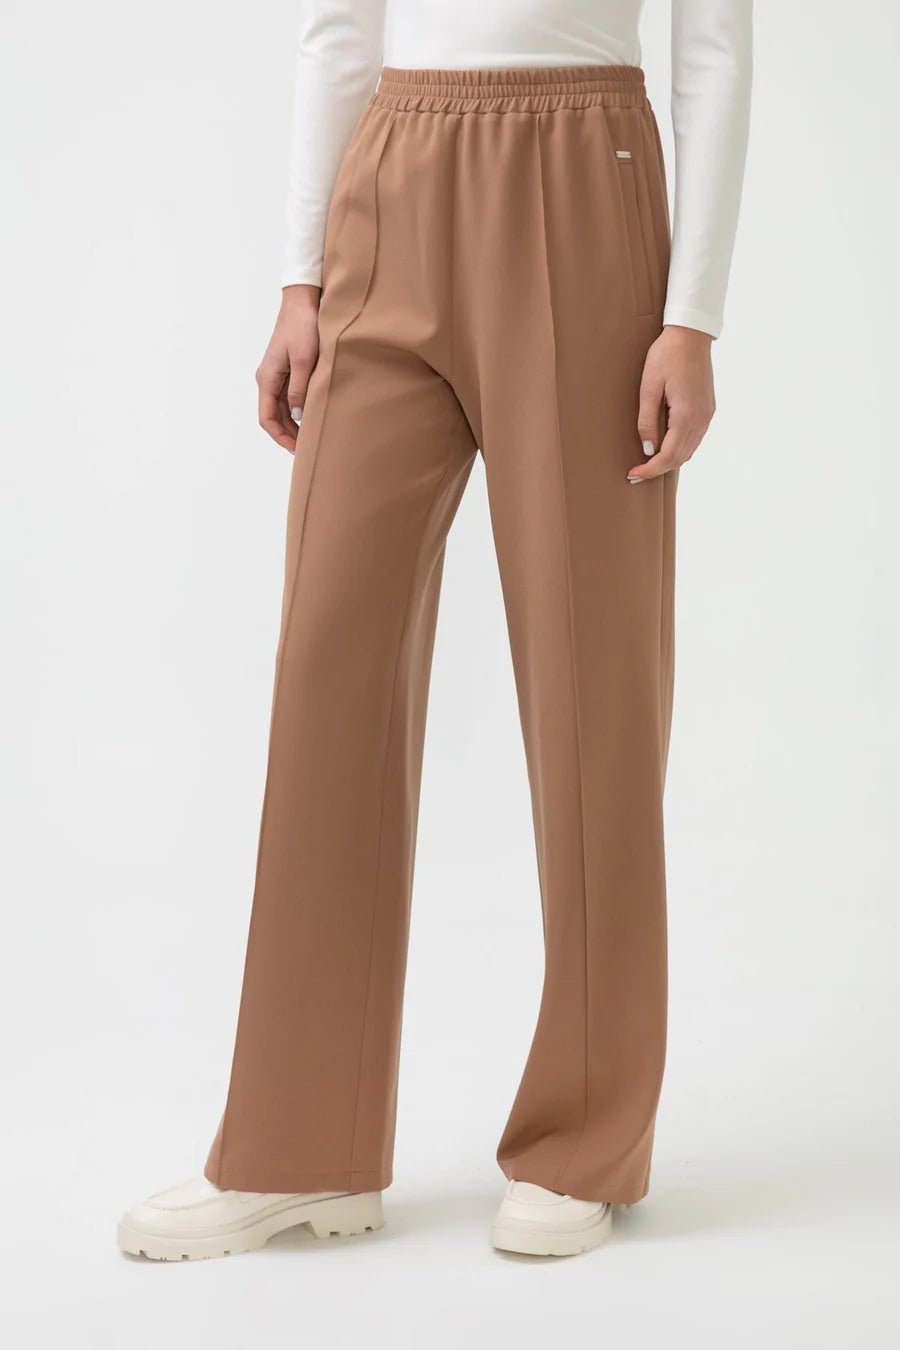 Brown Casual Ladies Trouser Pant – Modest Eve